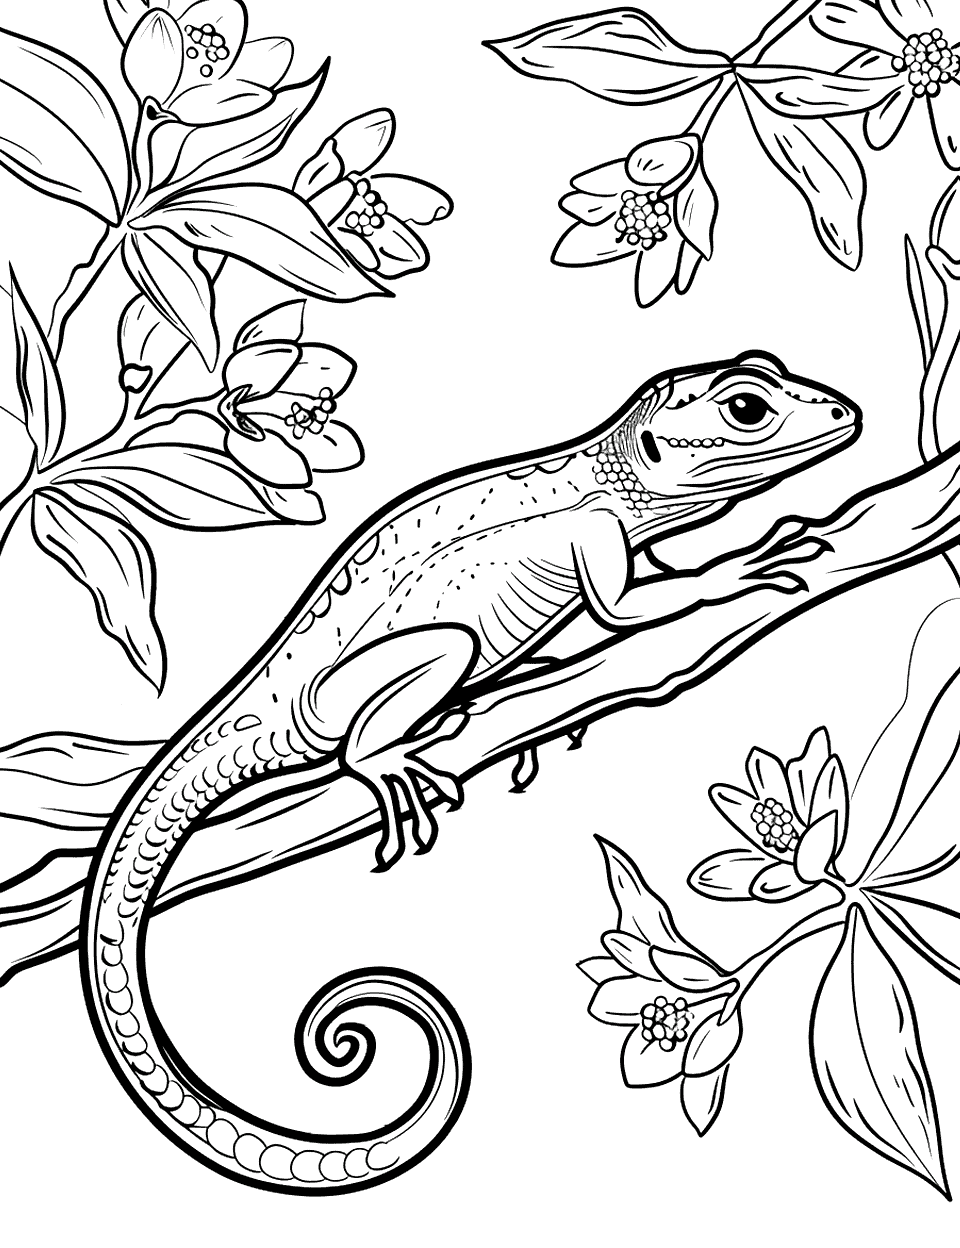 Anole on a Flowering Branch Lizard Coloring Page - An anole perched on a flowering branch, with a few blooming flowers around it.